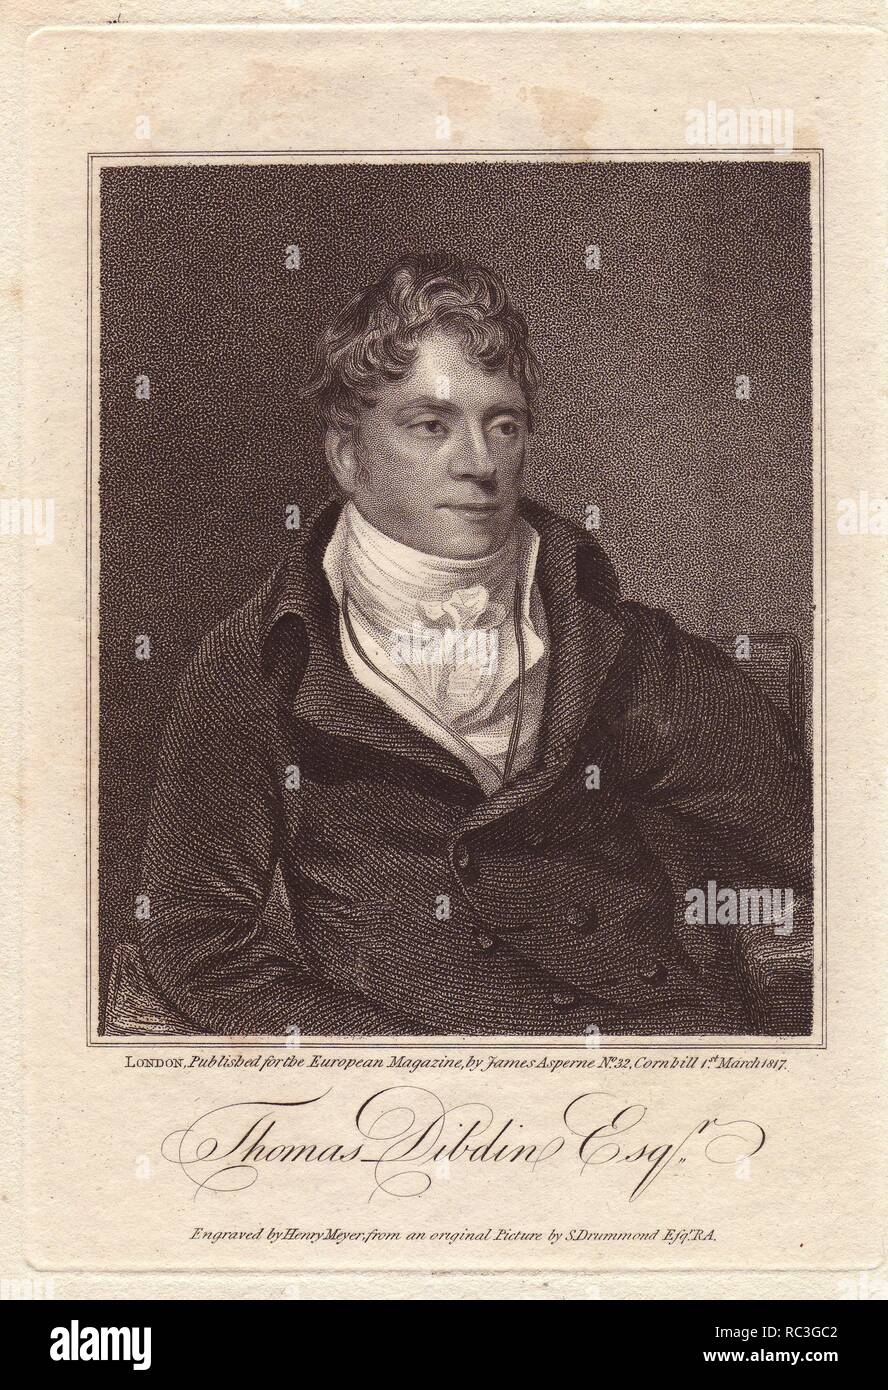 Mr. Thomas Dibdin (1771-1841), English dramatist and songwriter.. Engraved by Henry Mayer from an original painting by S. Drummond, published in the European Magazine, 1817. Stock Photo